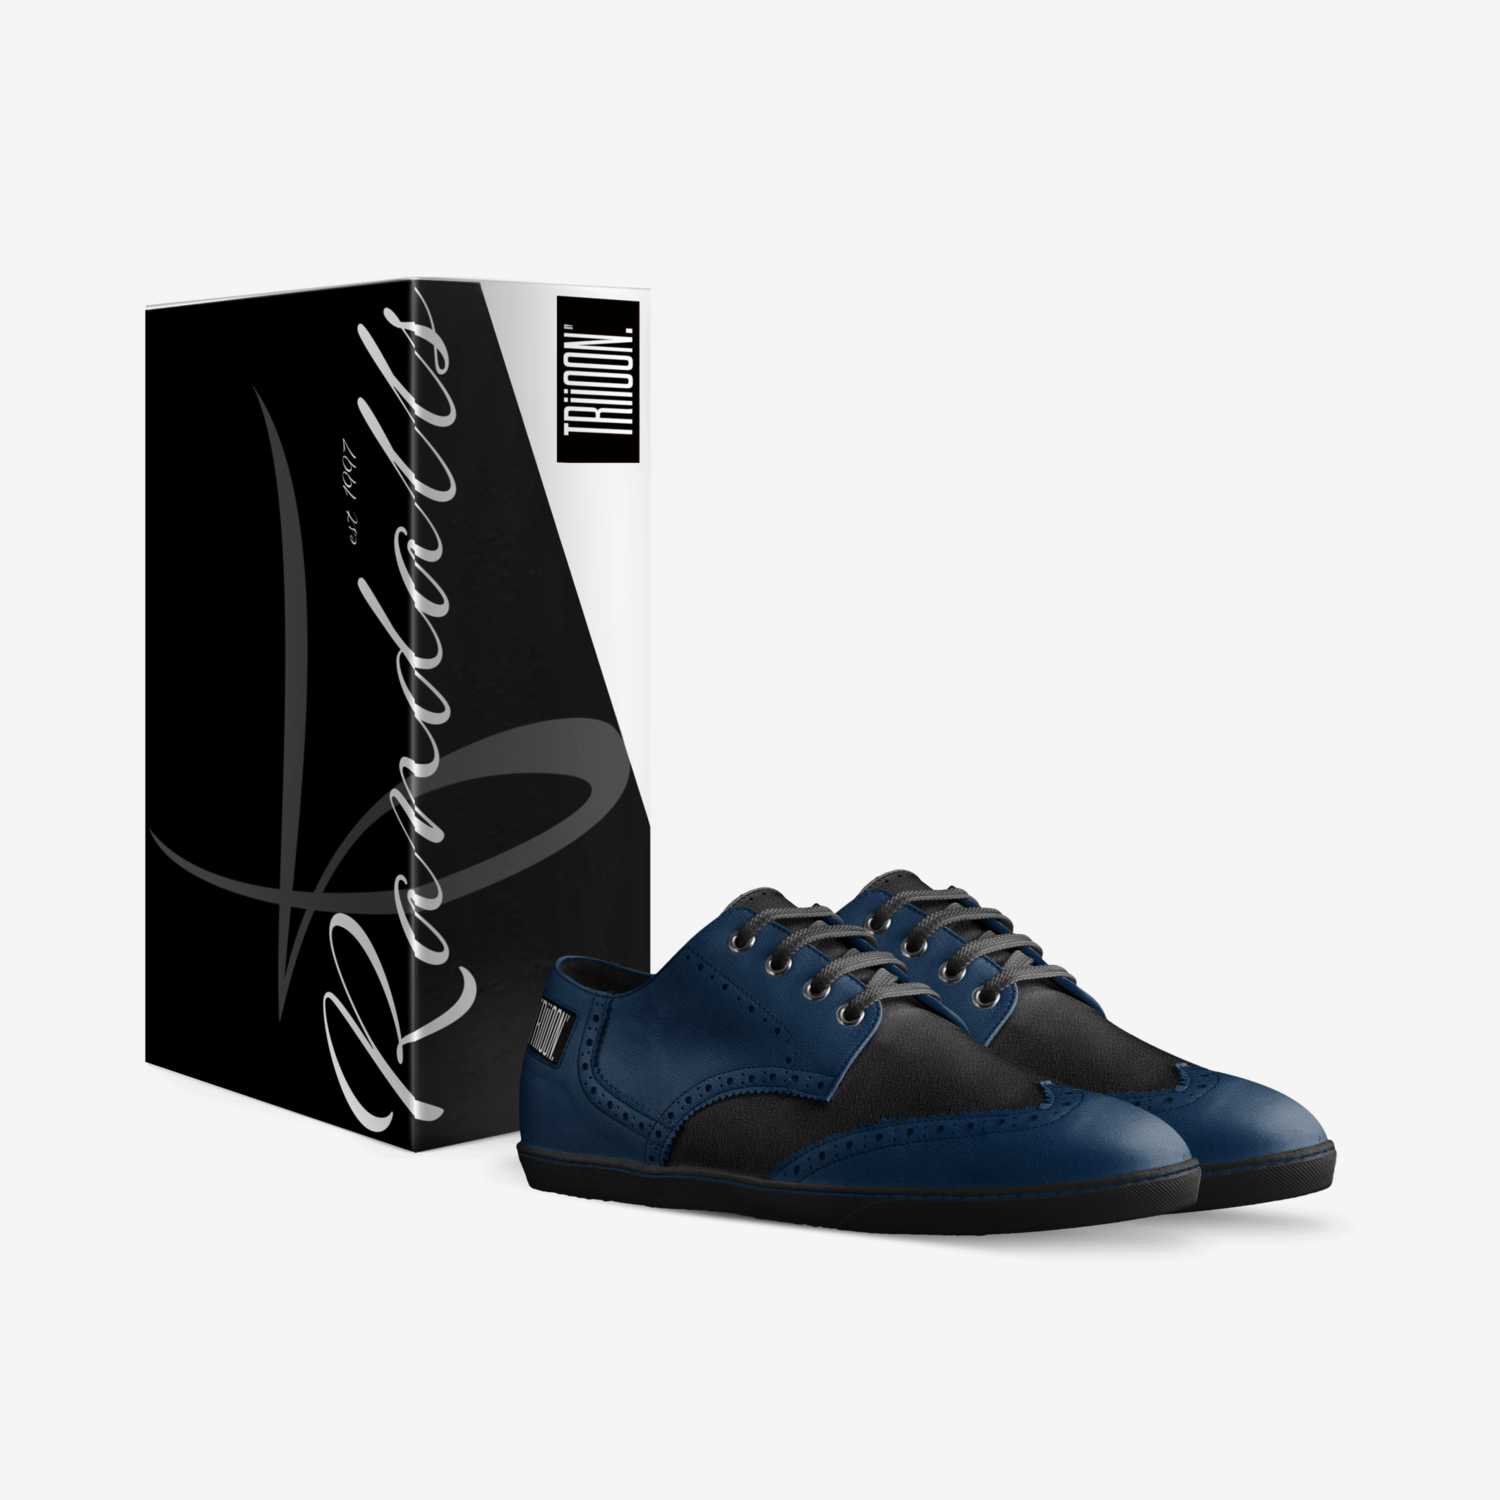 RANDALLS custom made in Italy shoes by Patrick Medley | Box view